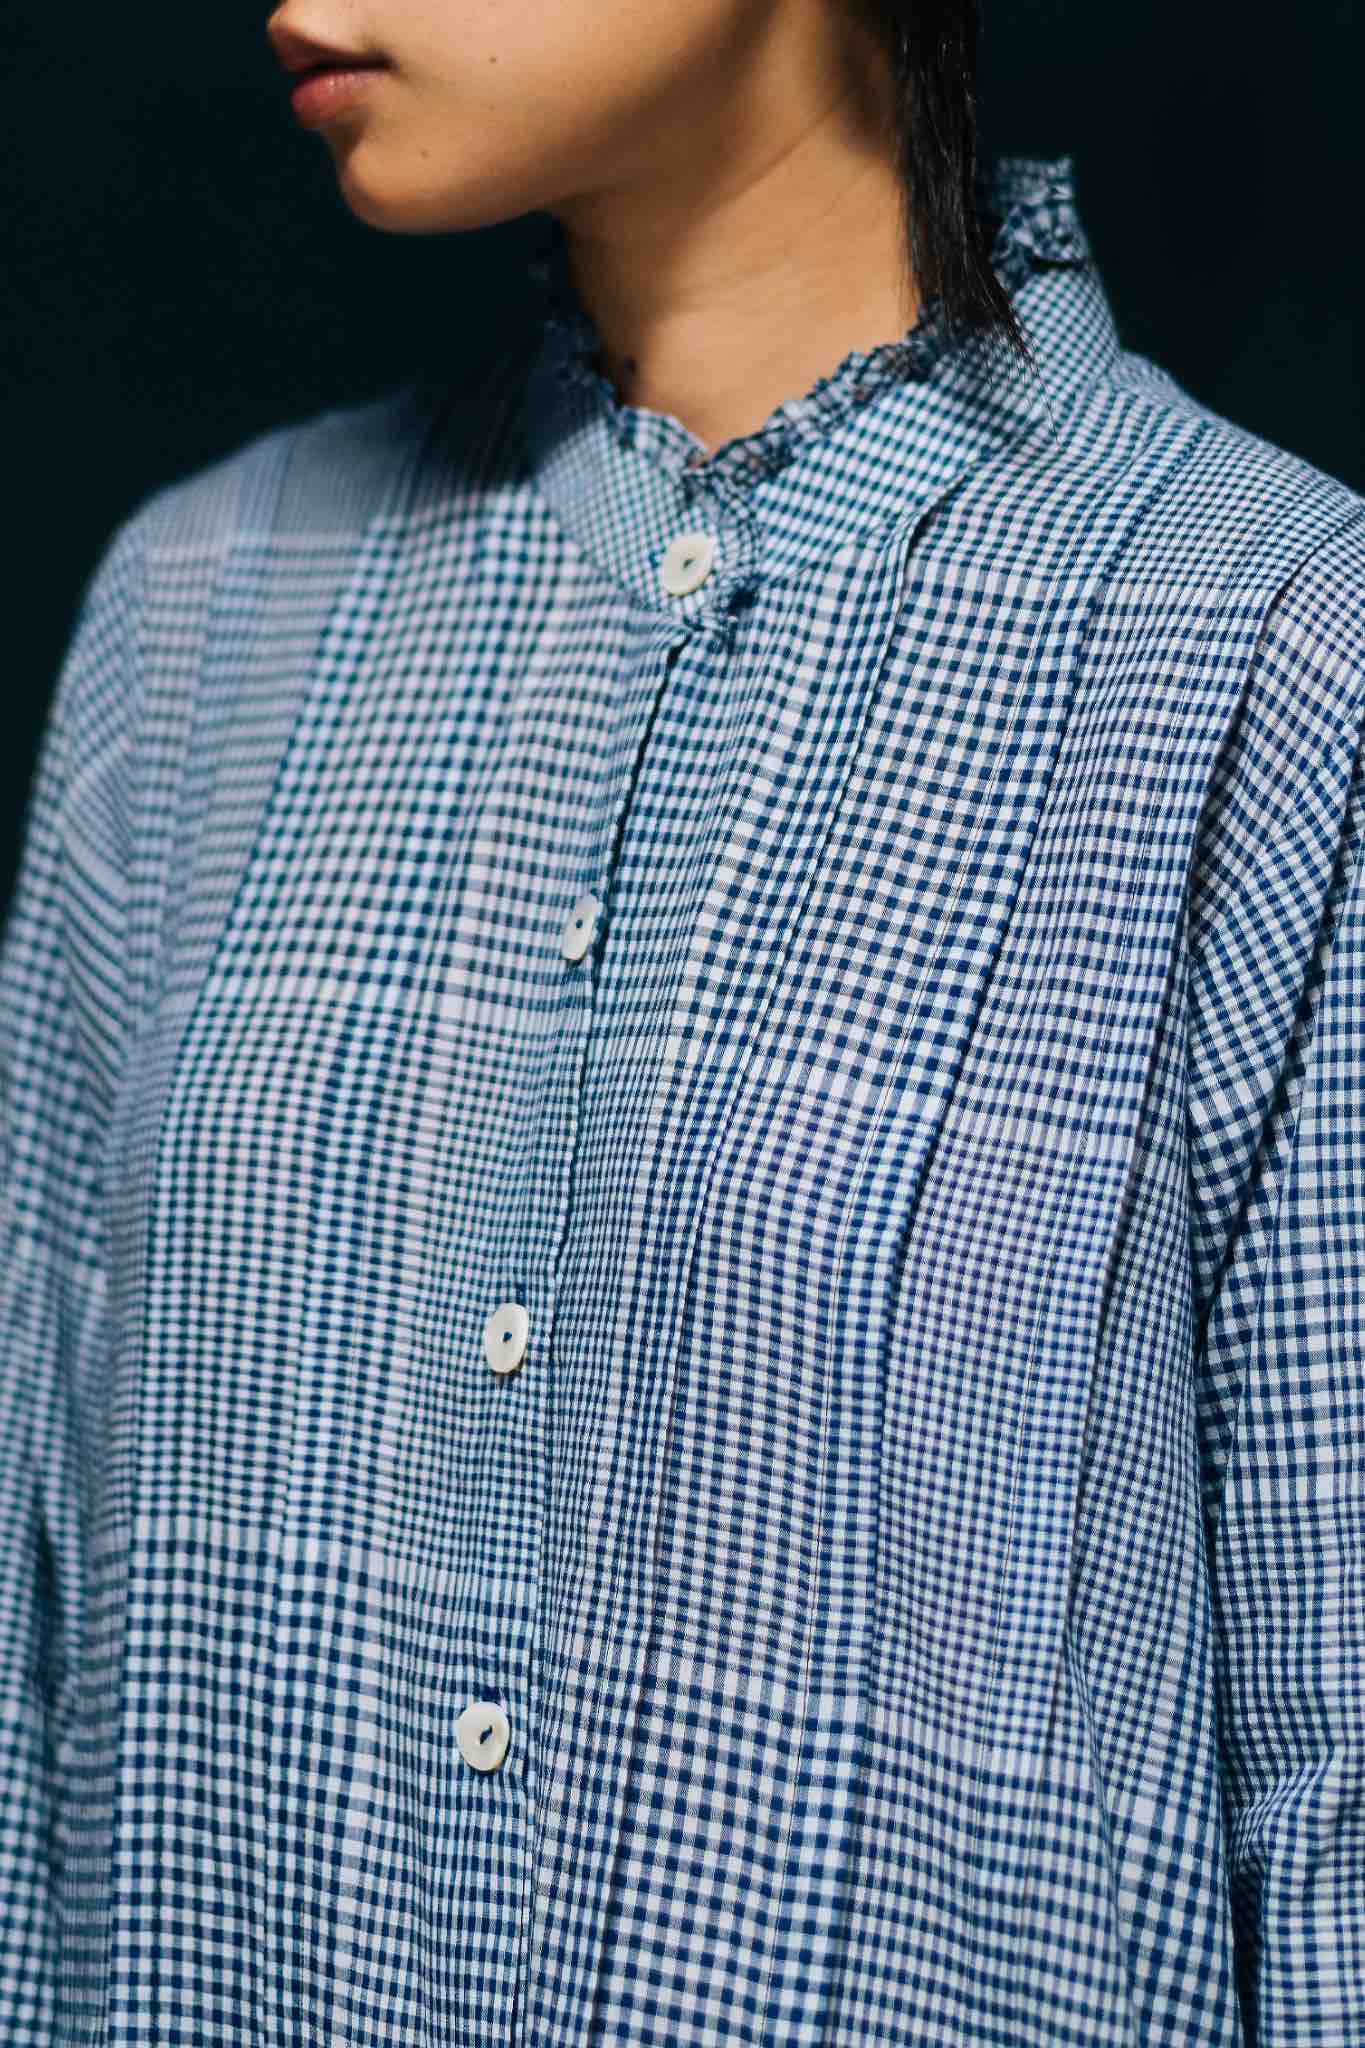 Charulata Blue and White Checkered Dress with Gathers, 3/4 Sleeves - Detail